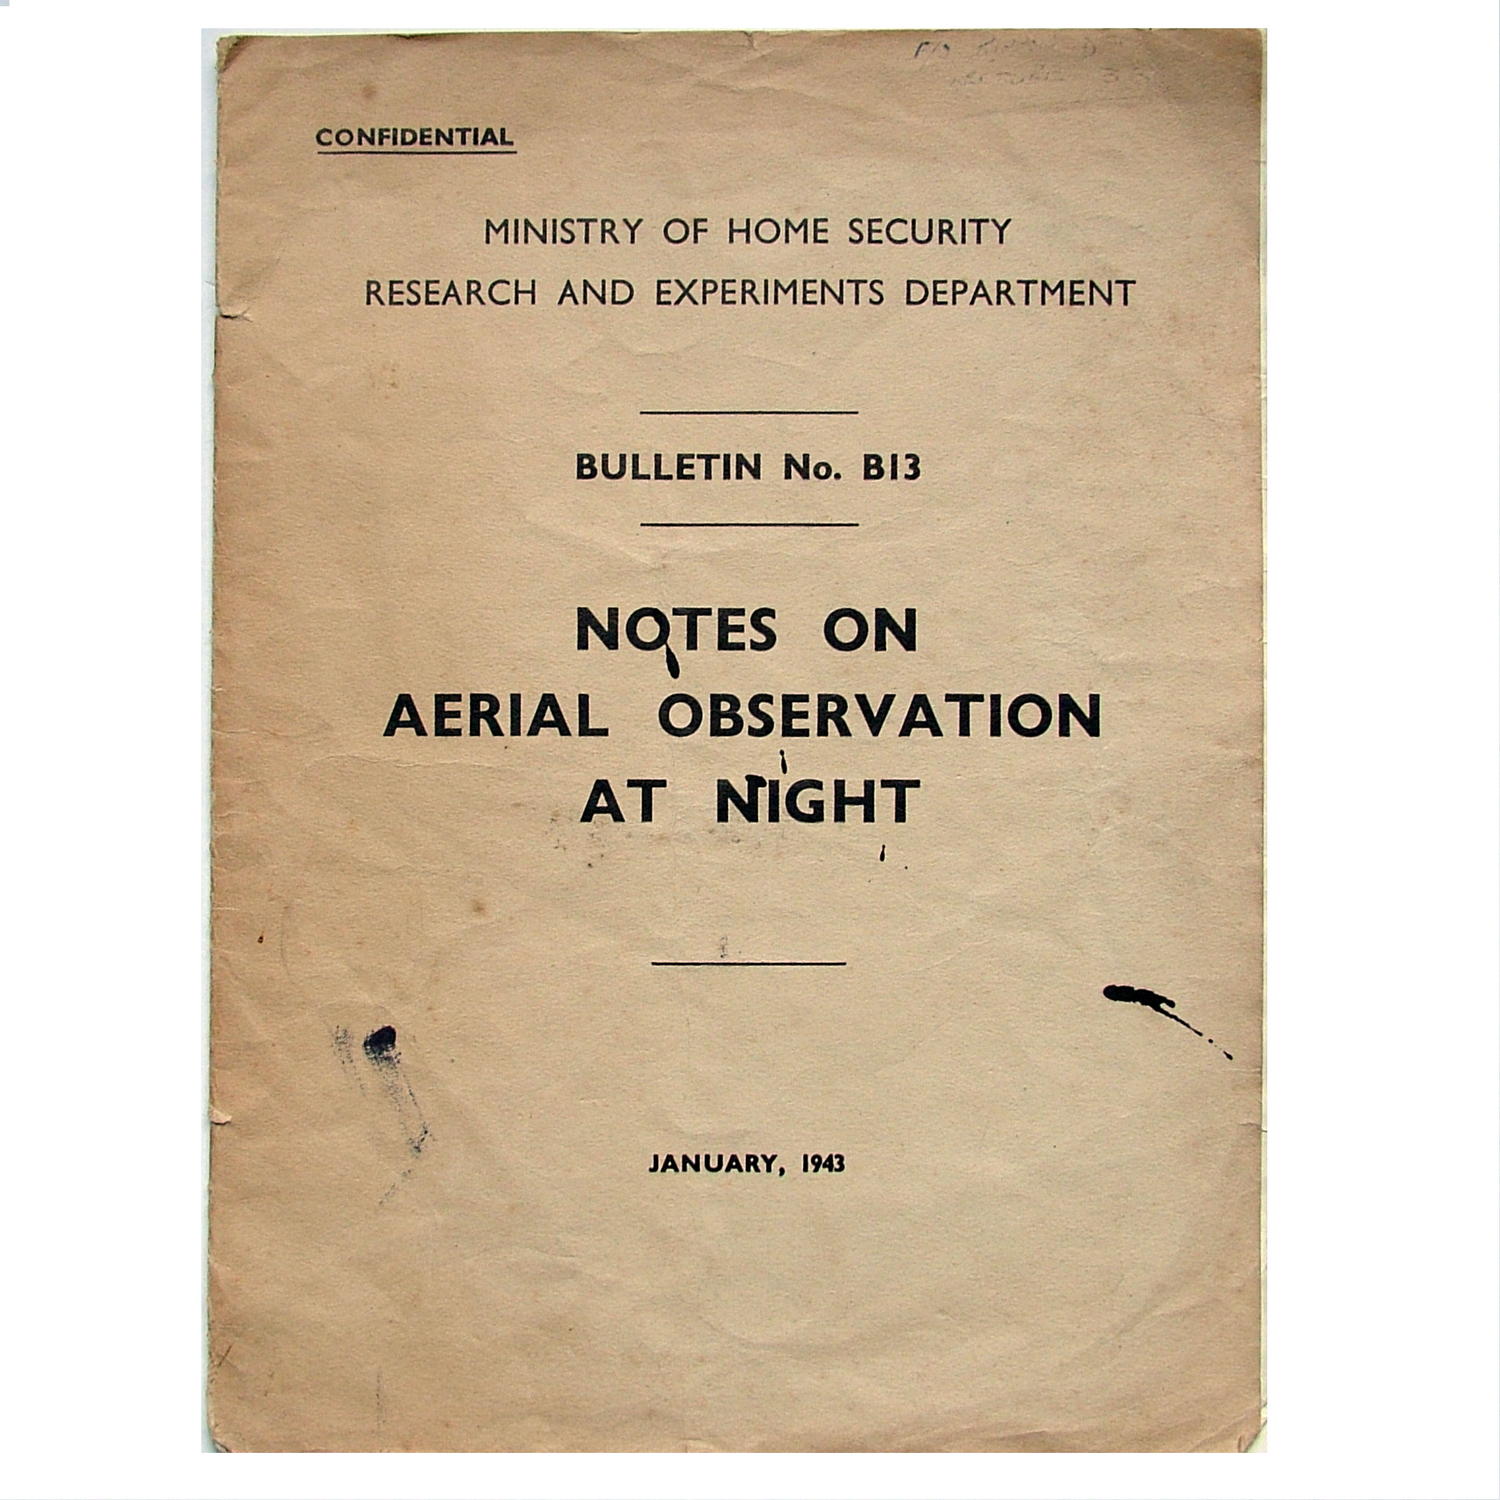 Notes on aerial observation at night